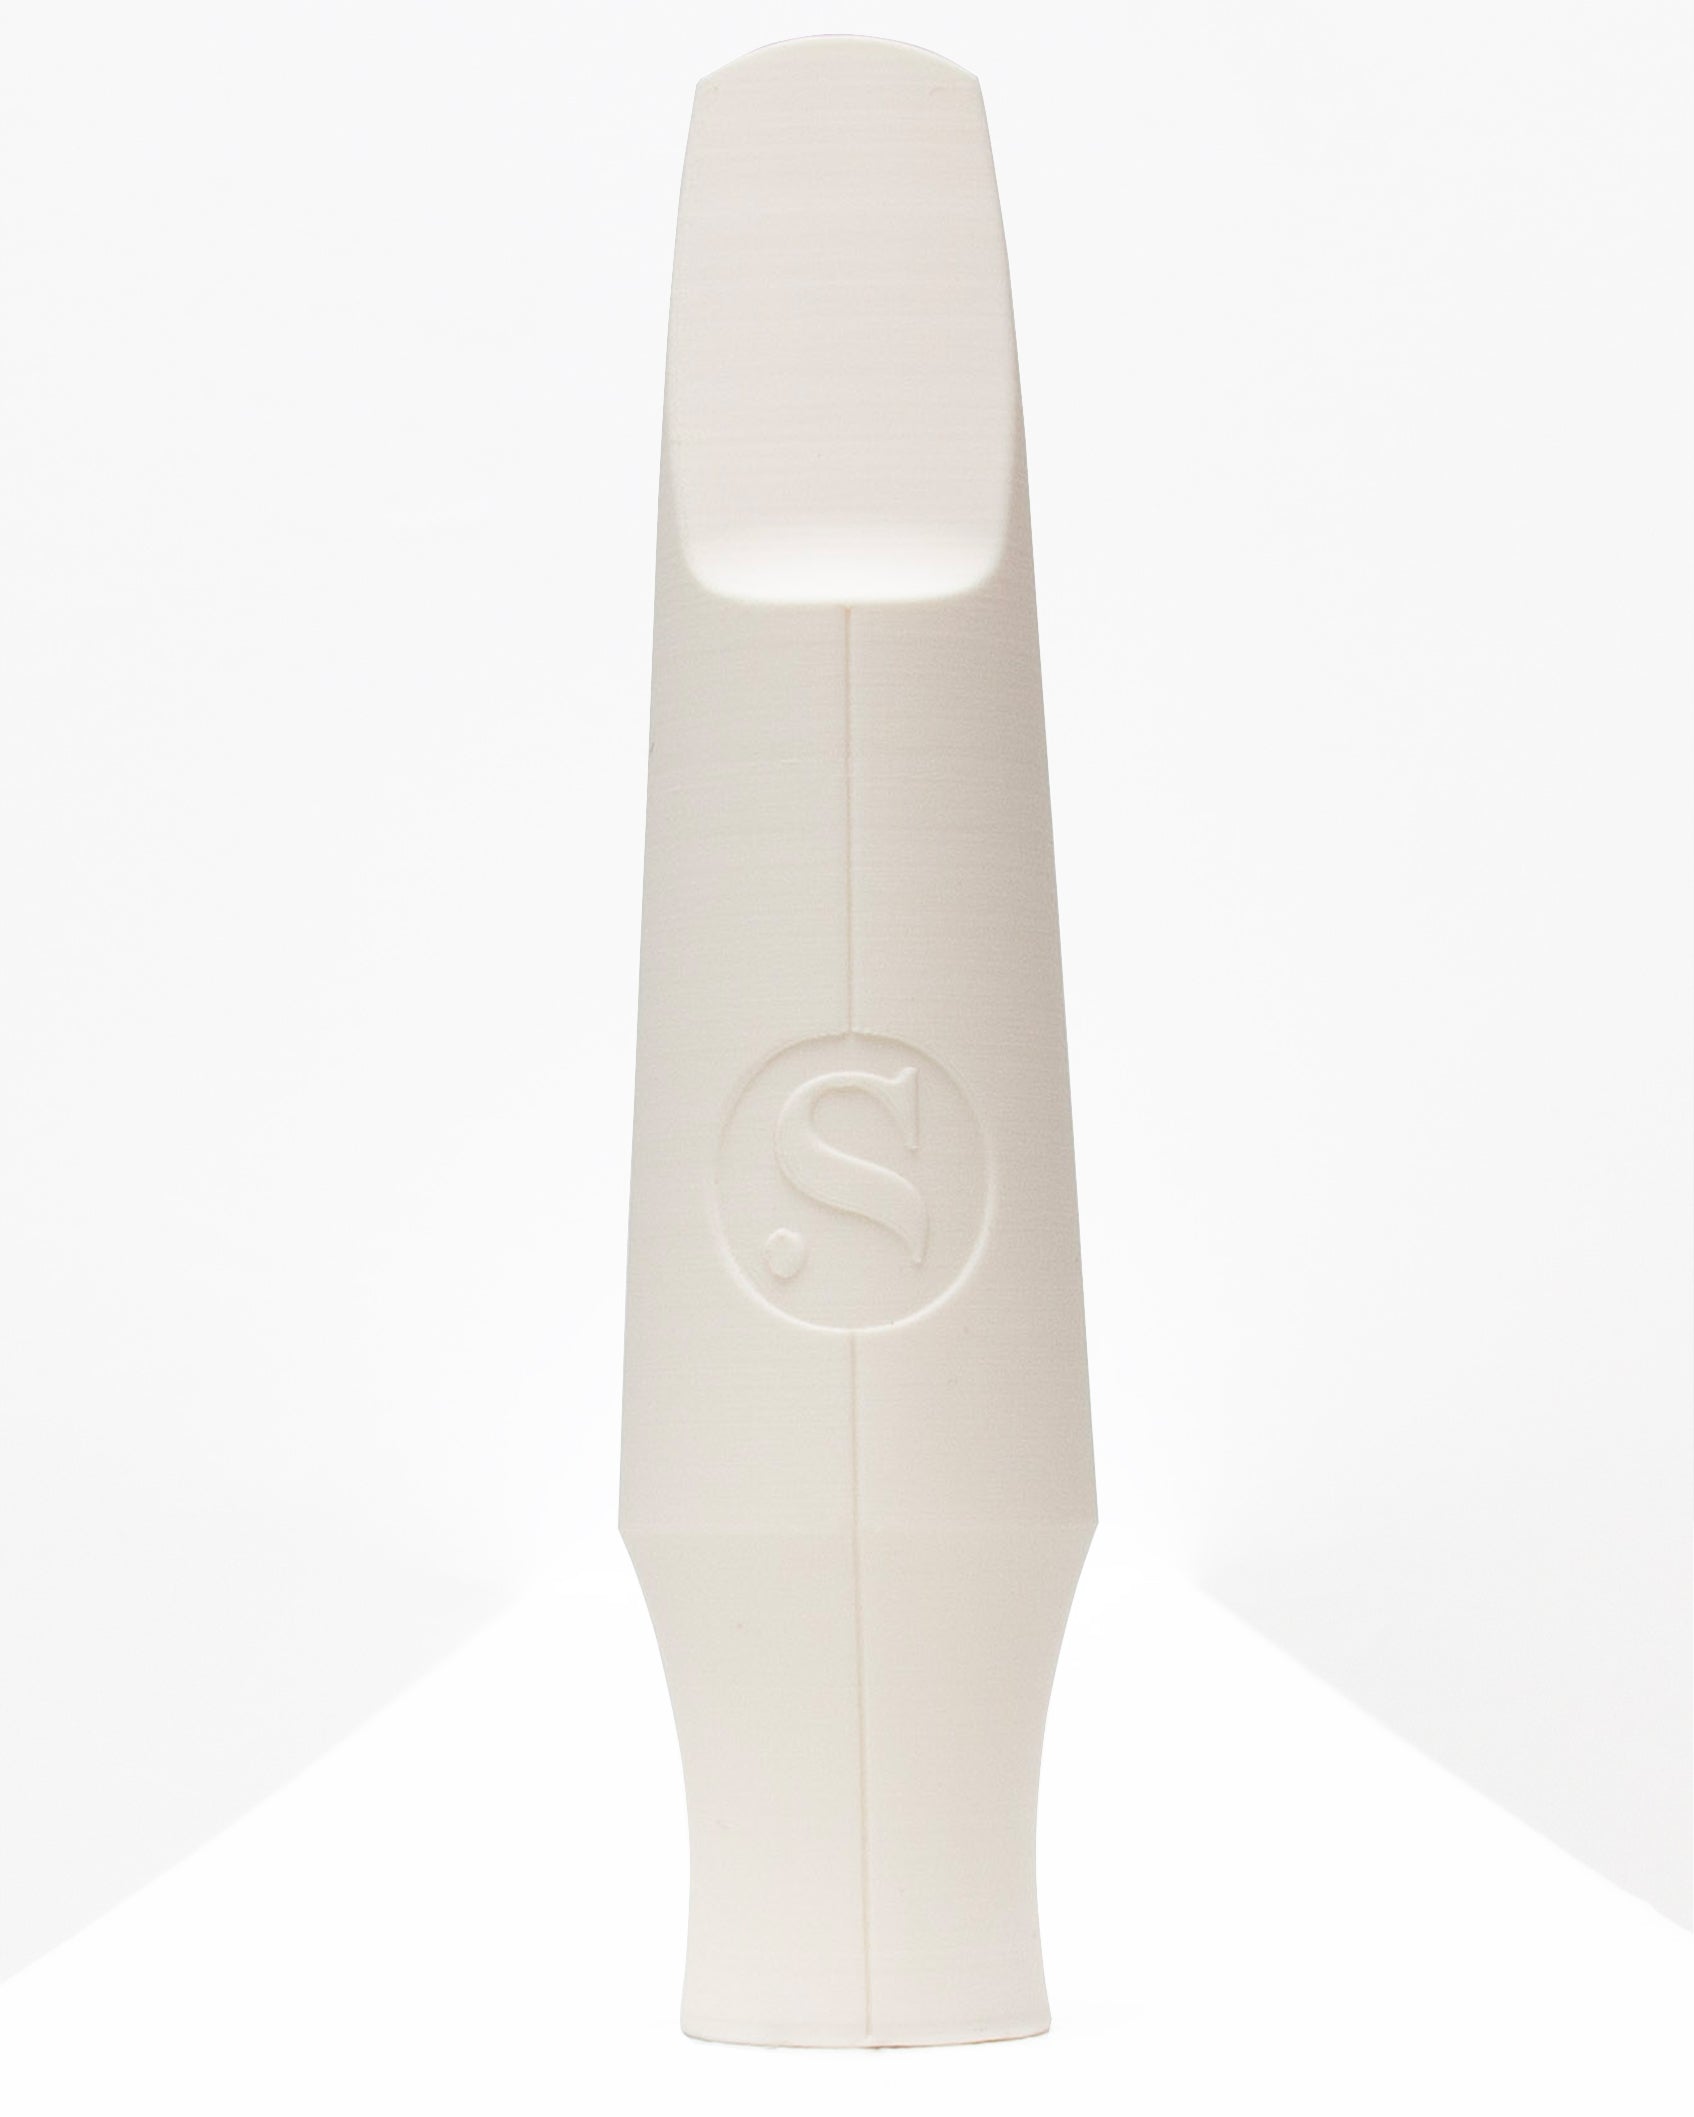 Baritone Signature Saxophone mouthpiece - Adrian Condis by Syos - 9 / Arctic White